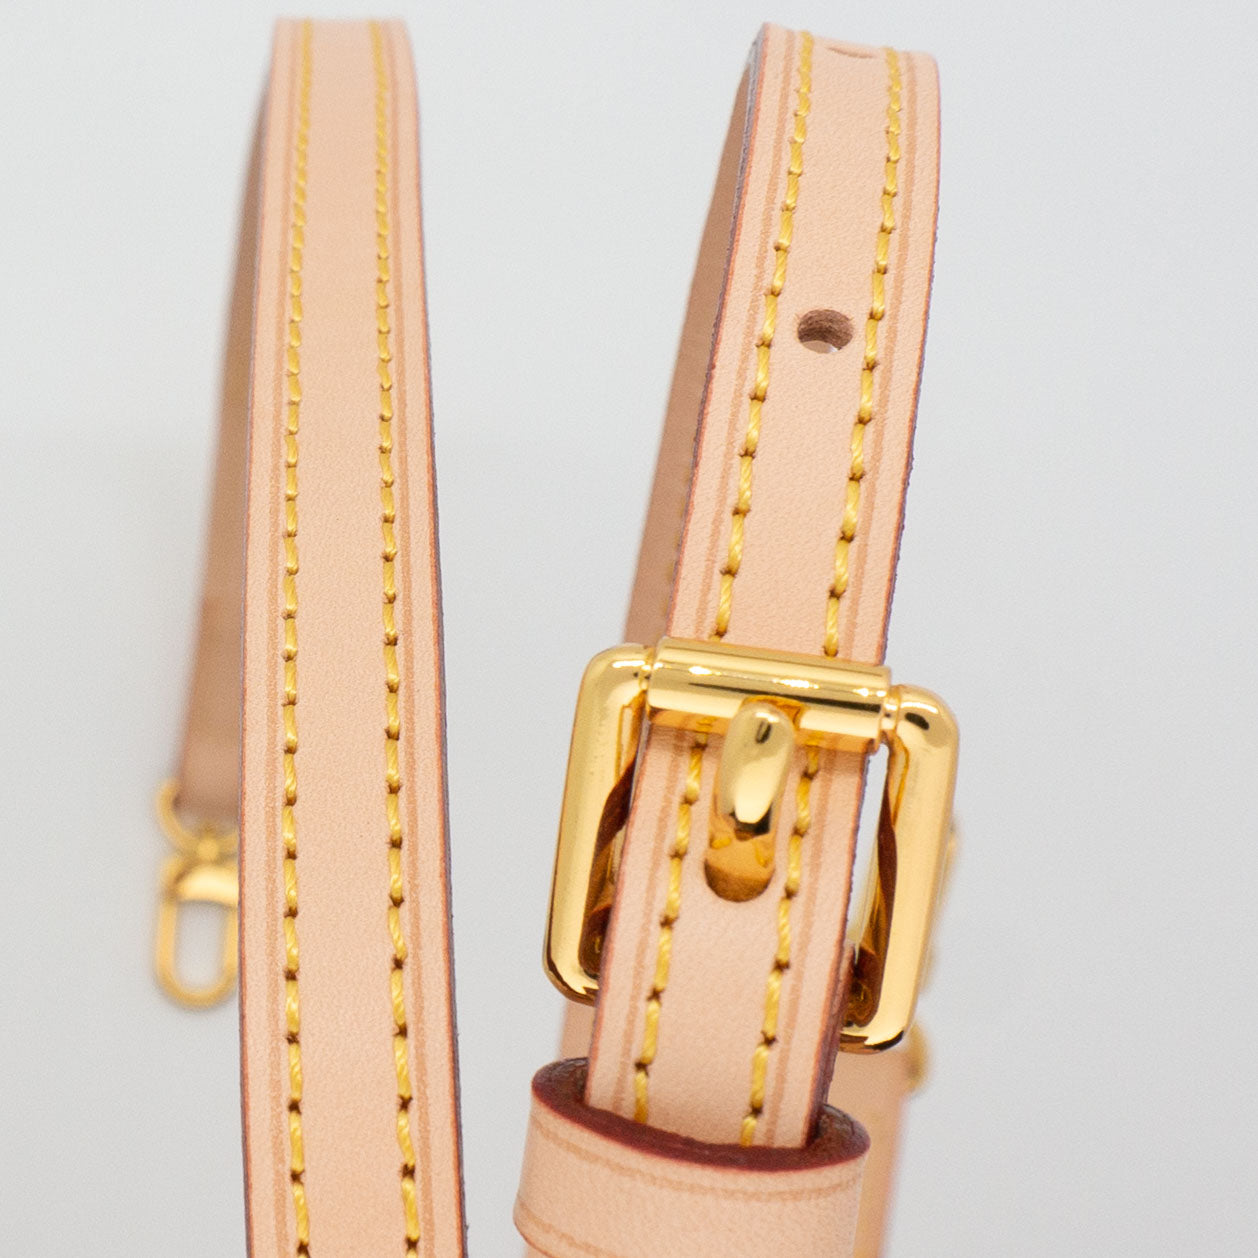 Adjustable Leather Strap in vachetta leather - 1.1cm wide